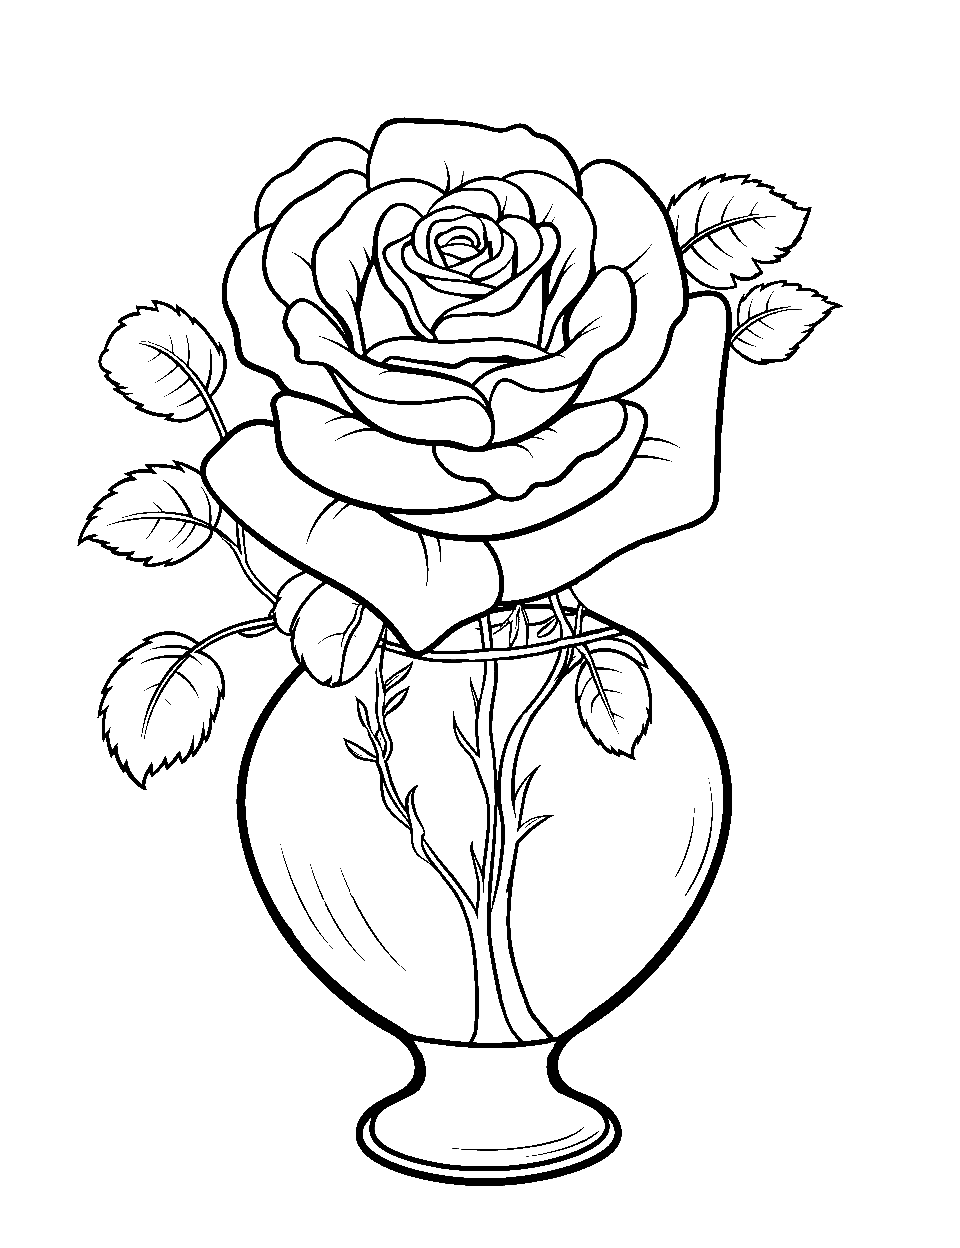 Share more than 169 rose flower vase drawing